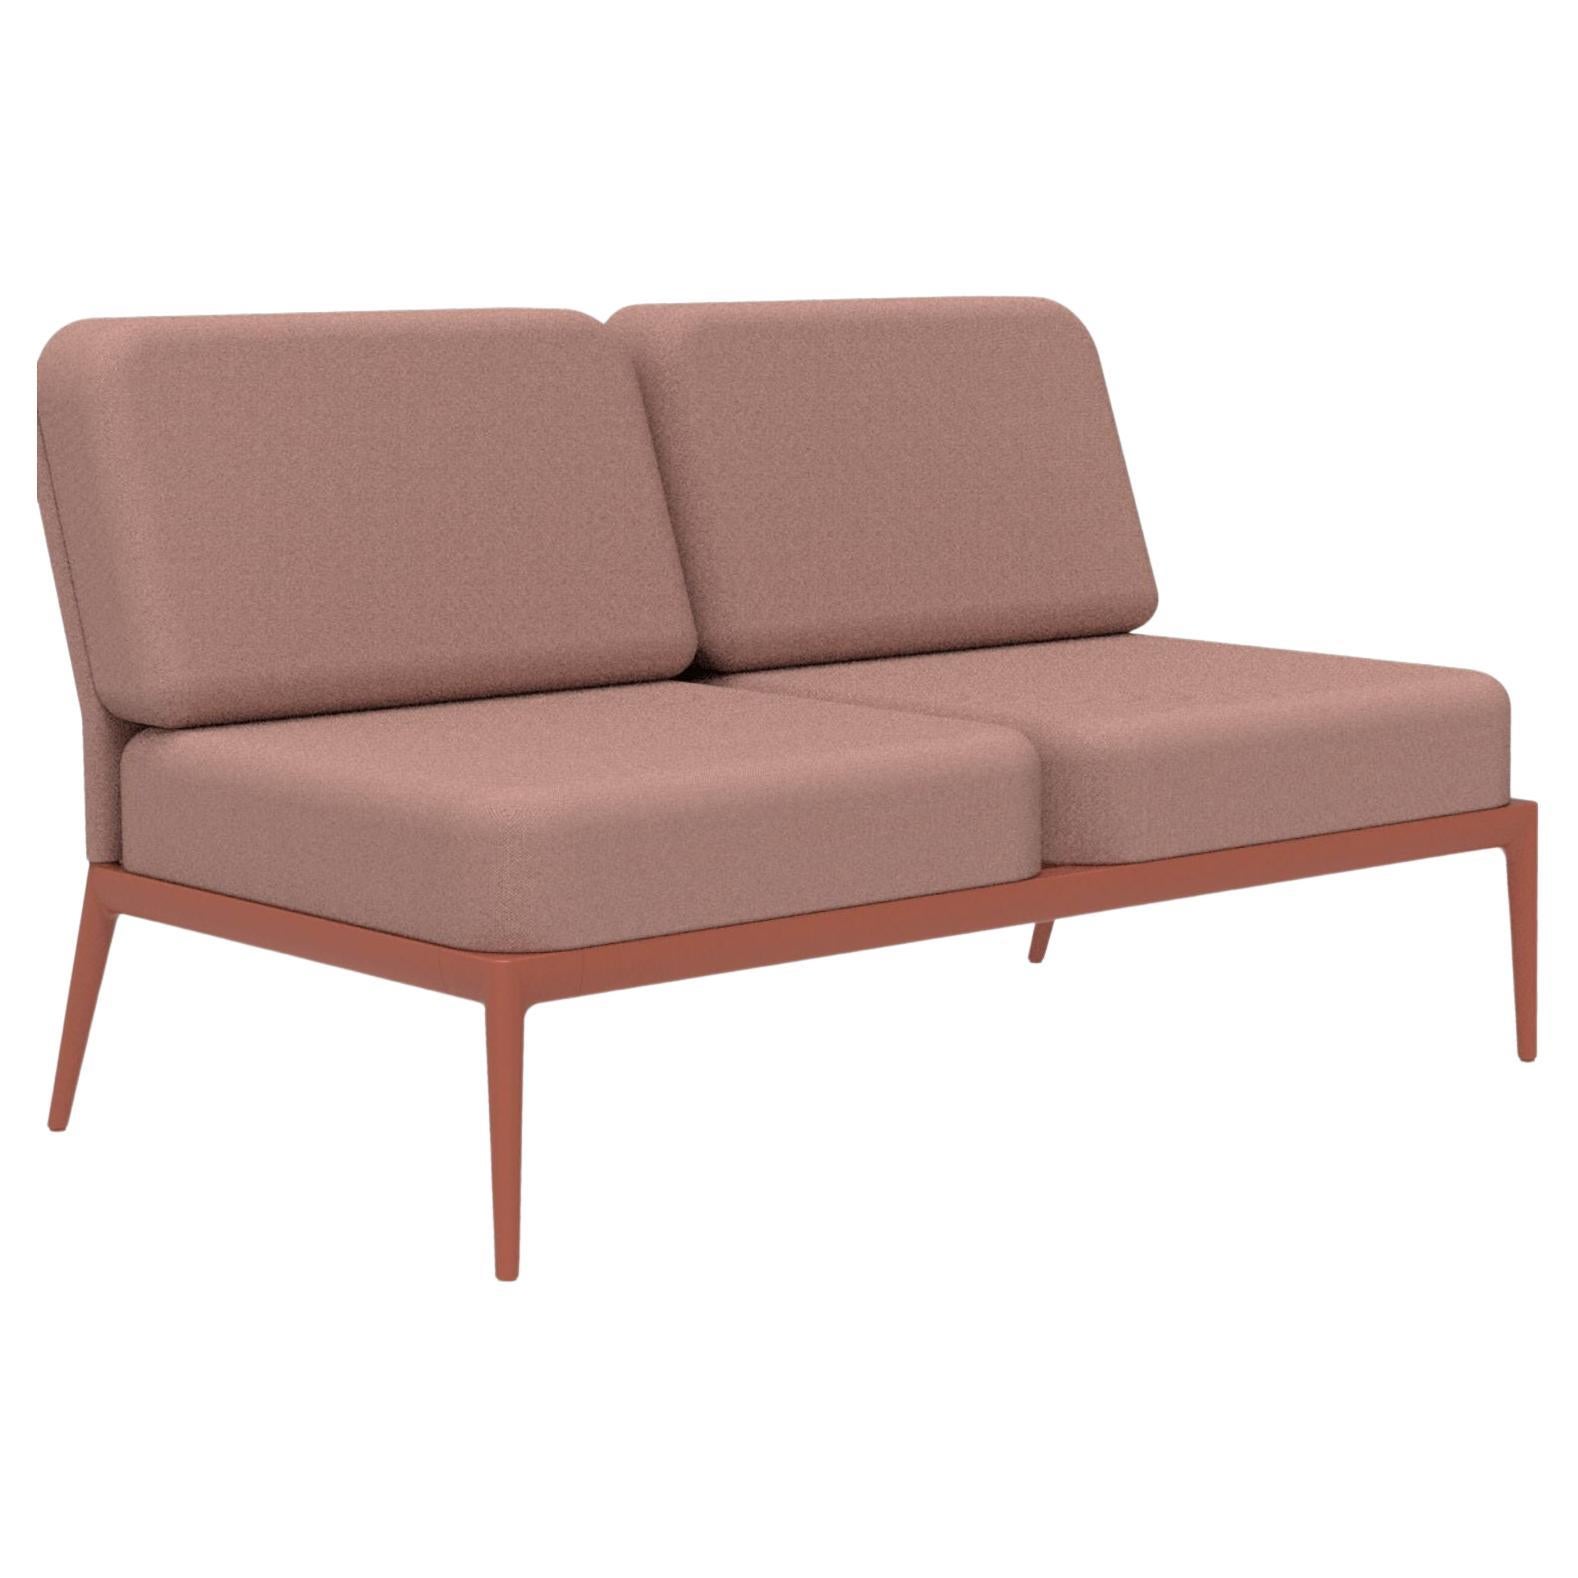 Cover Salmon Double Central Modular Sofa by Mowee For Sale